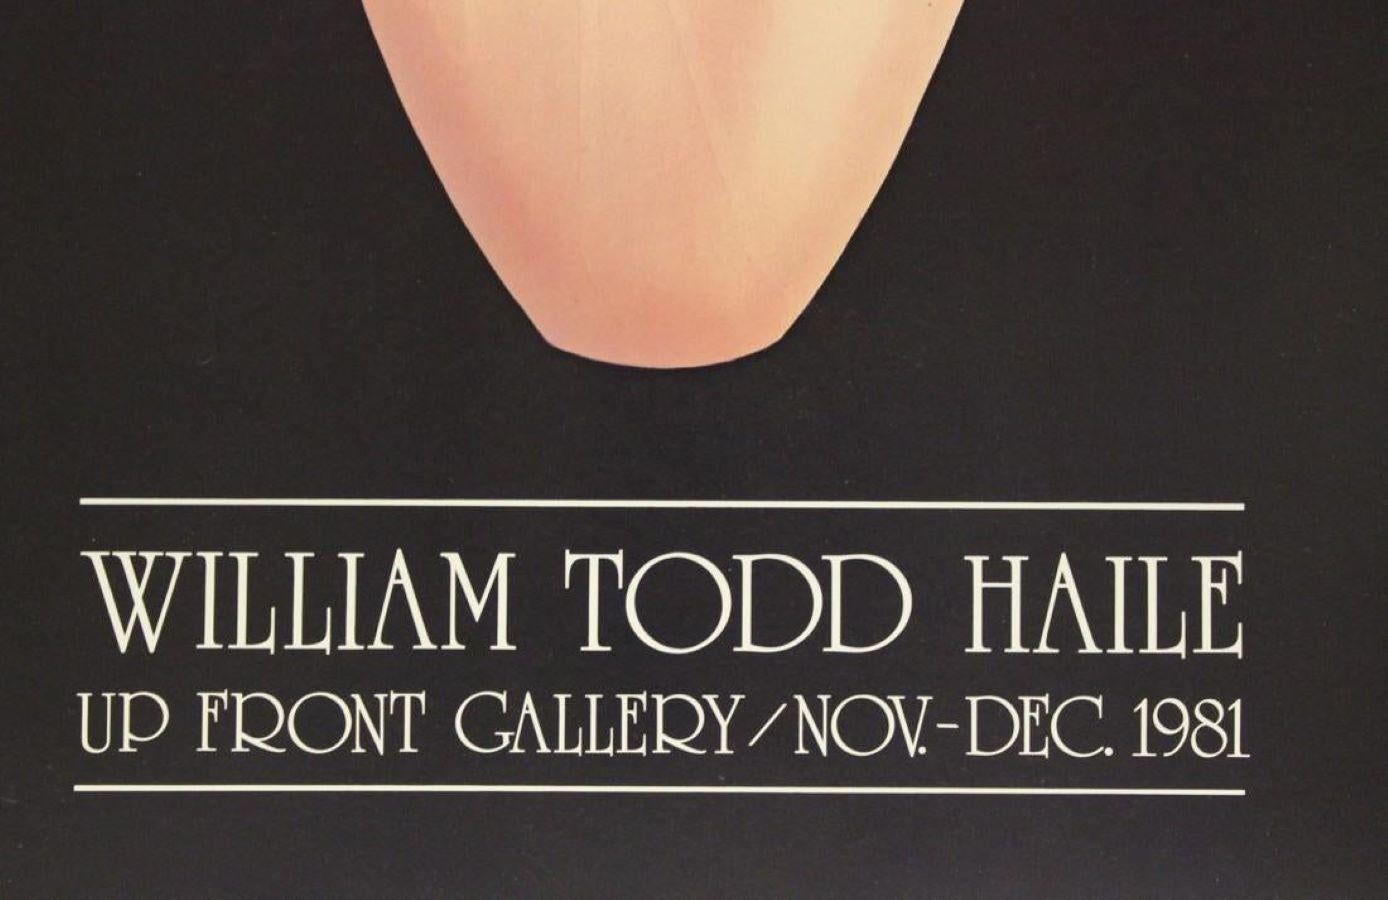 Poster-Up Front Gallery Nov.-Dec. 1981 - Print by William Todd Haile